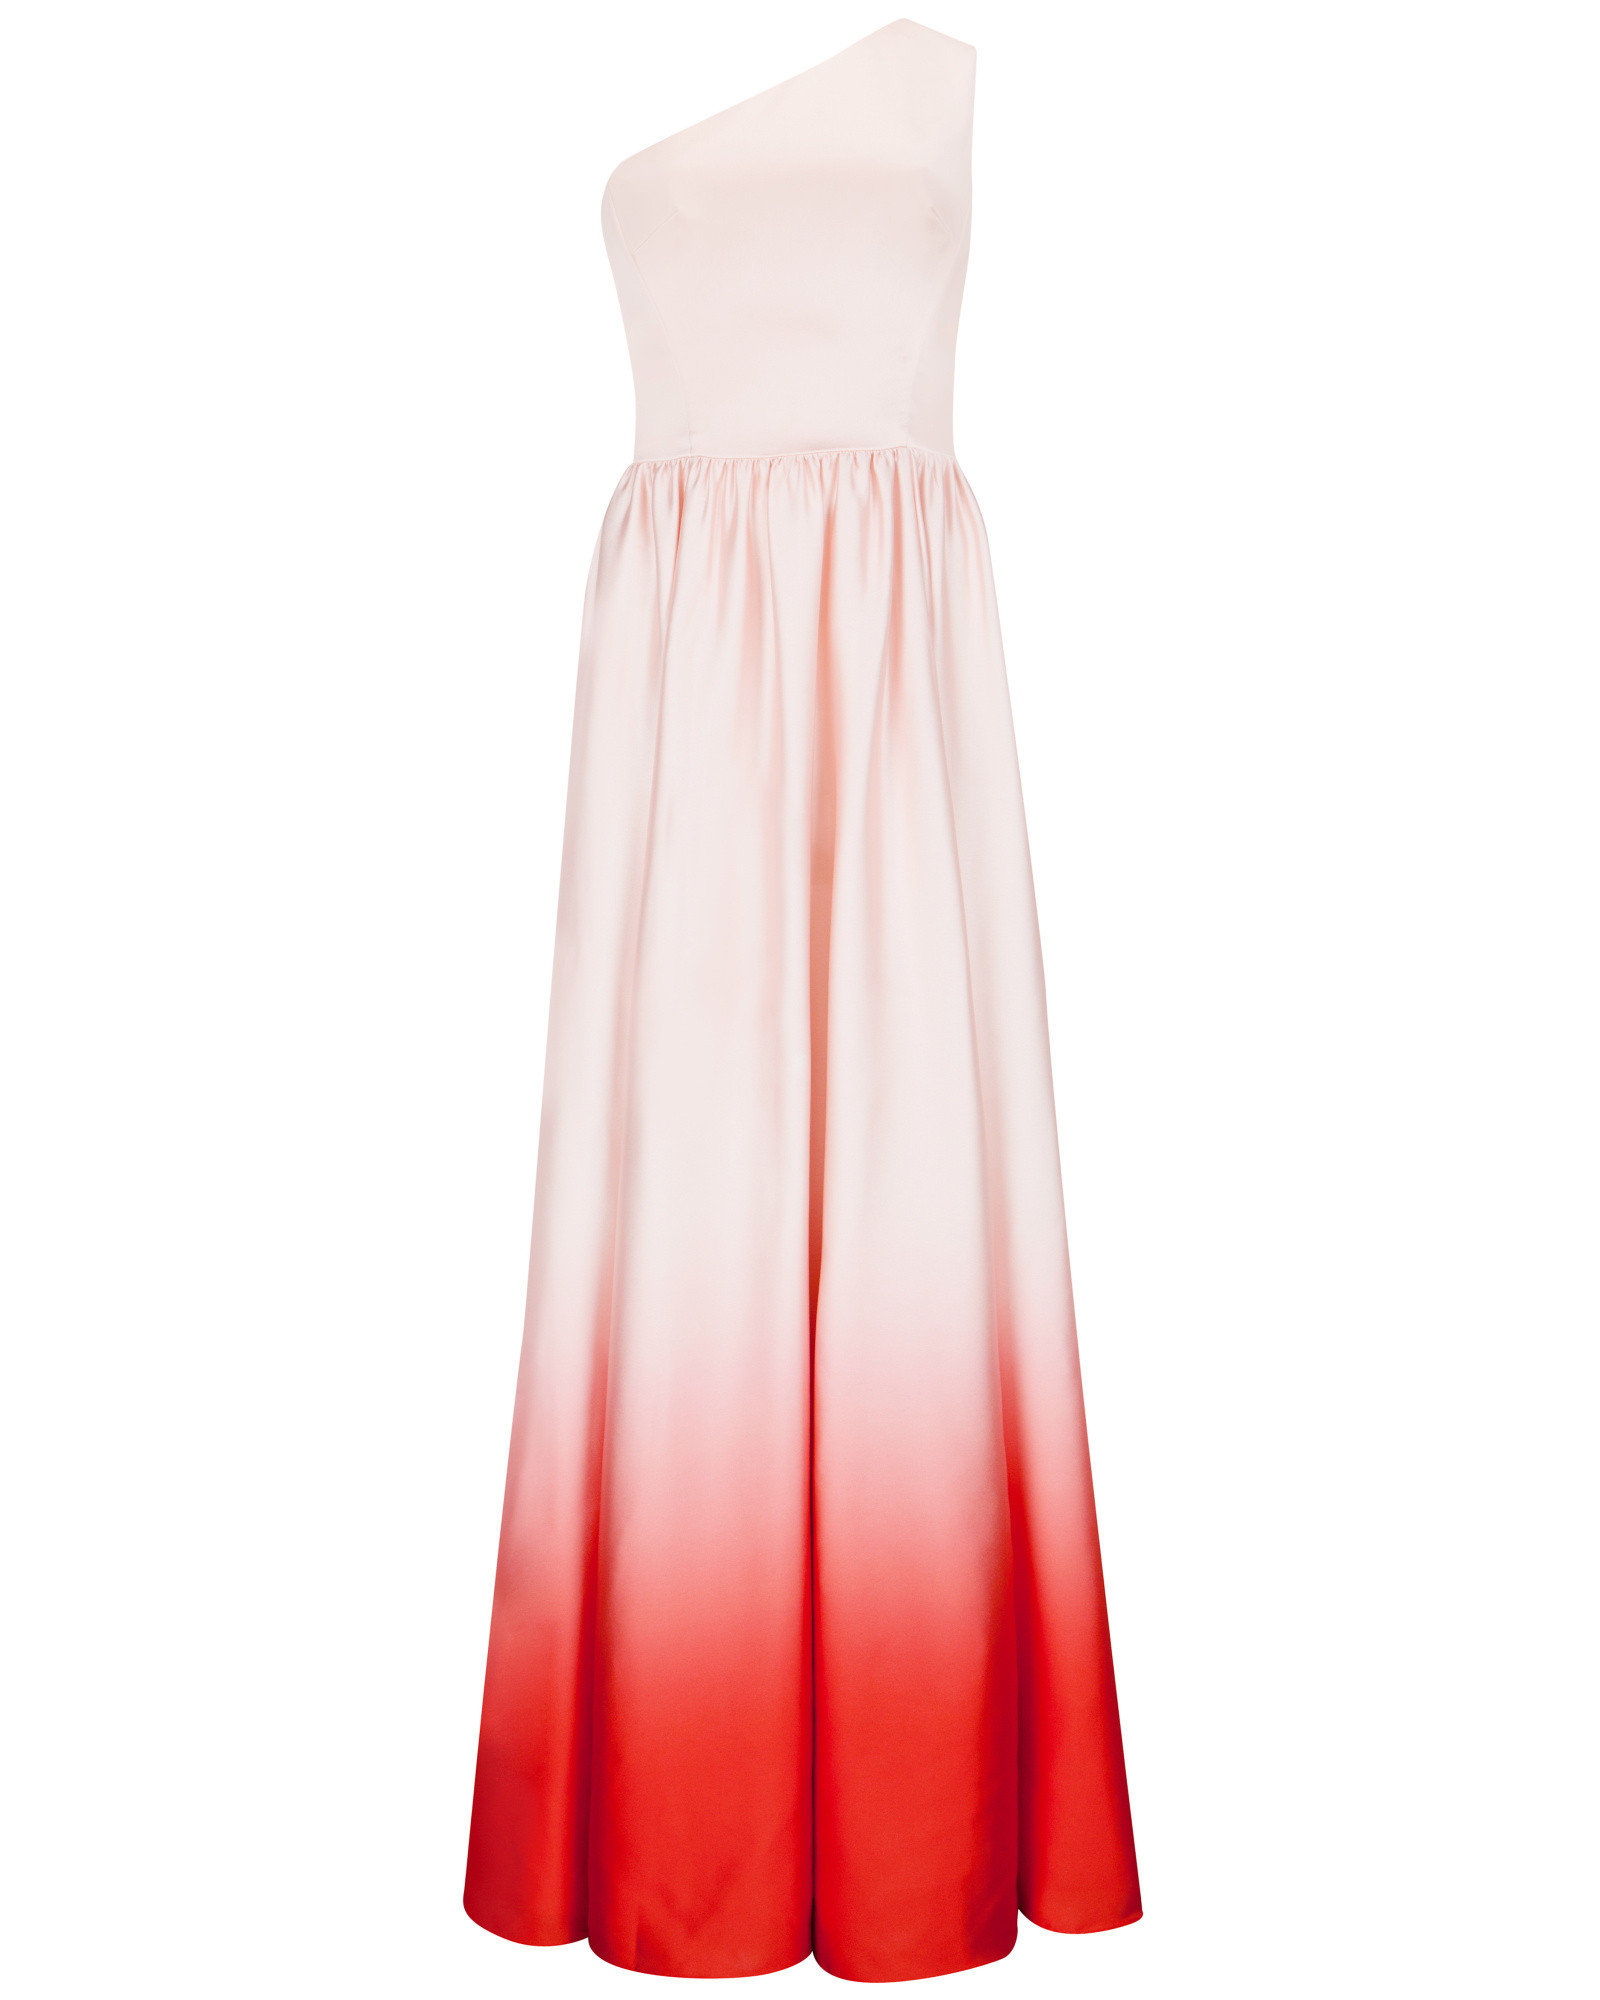 Ted Baker Daneka Maxi Dress With Dip Dyed Hem in Nude Pink (Pink) - Lyst